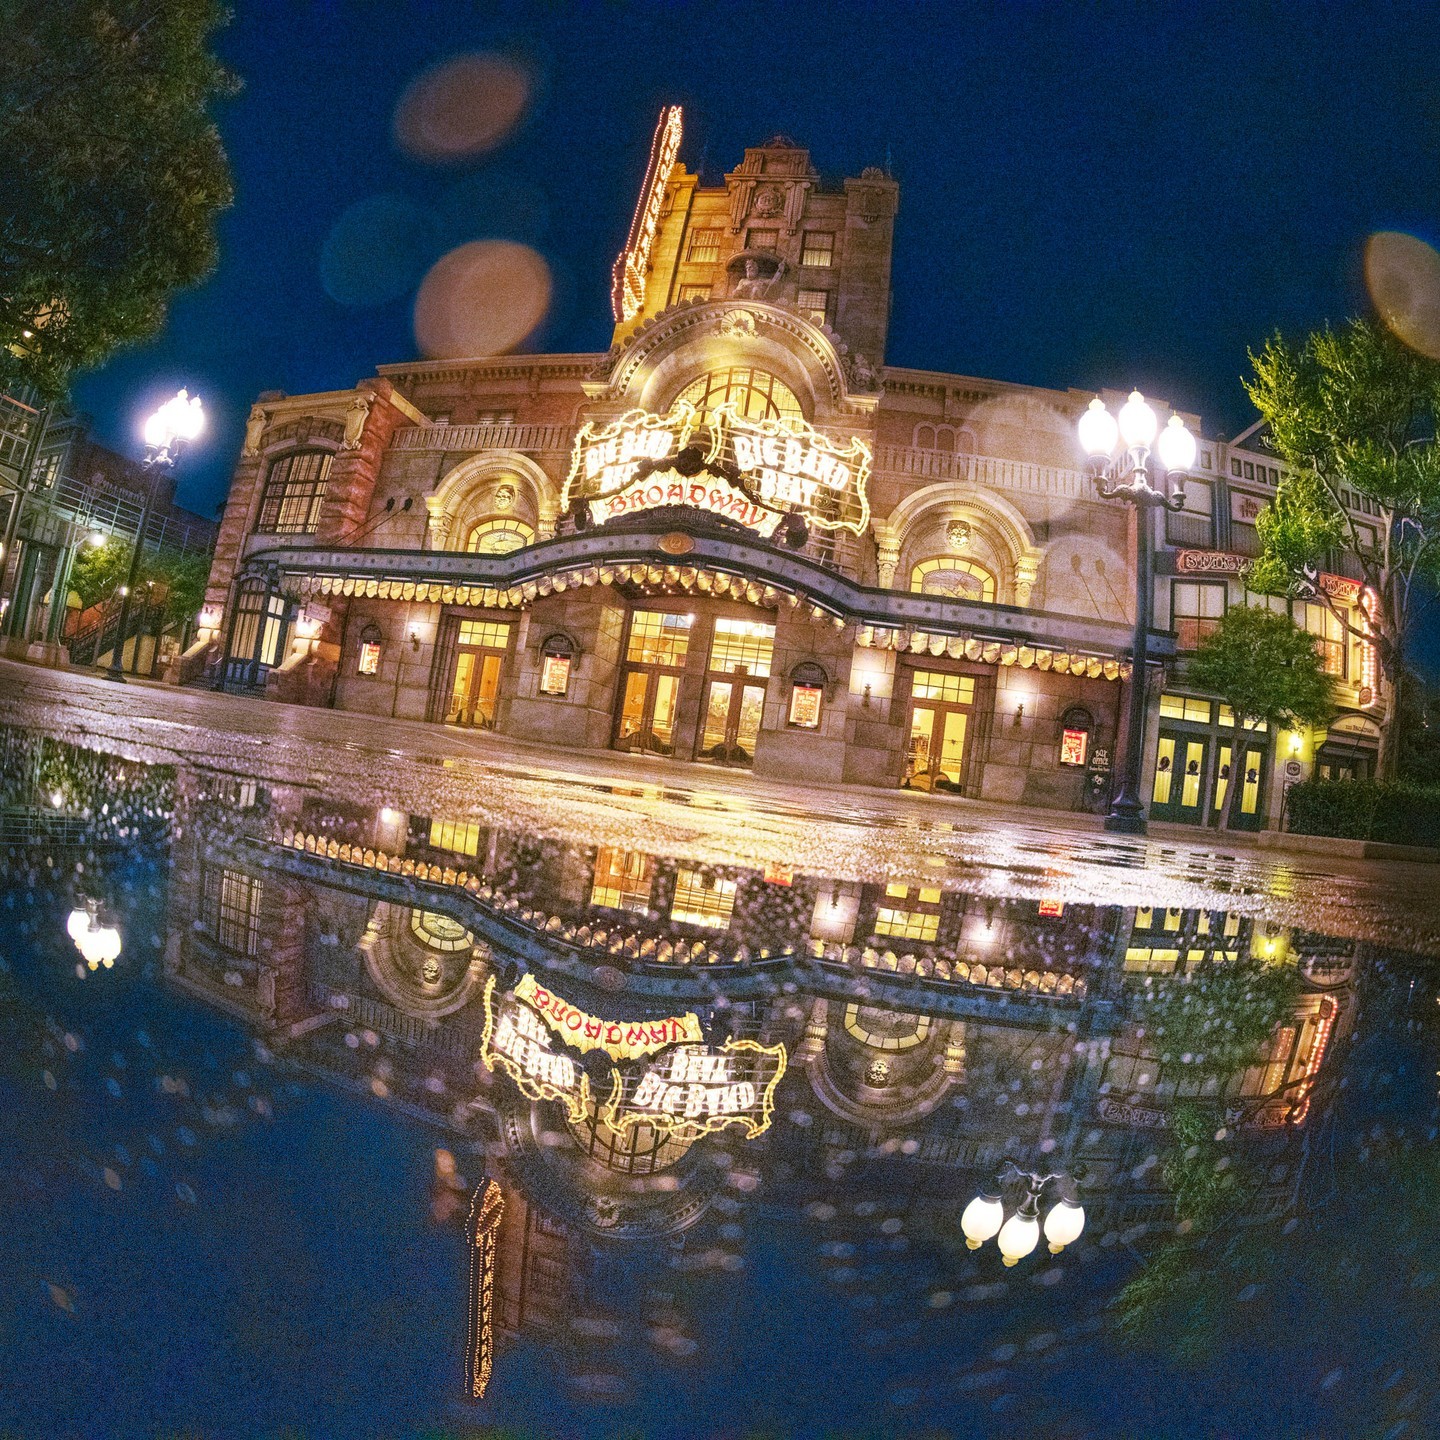 image of Shining Broadway Music Theatre!
きらきらが詰まった場所☆
#broadwaymusictheatre #americanwaterfront...